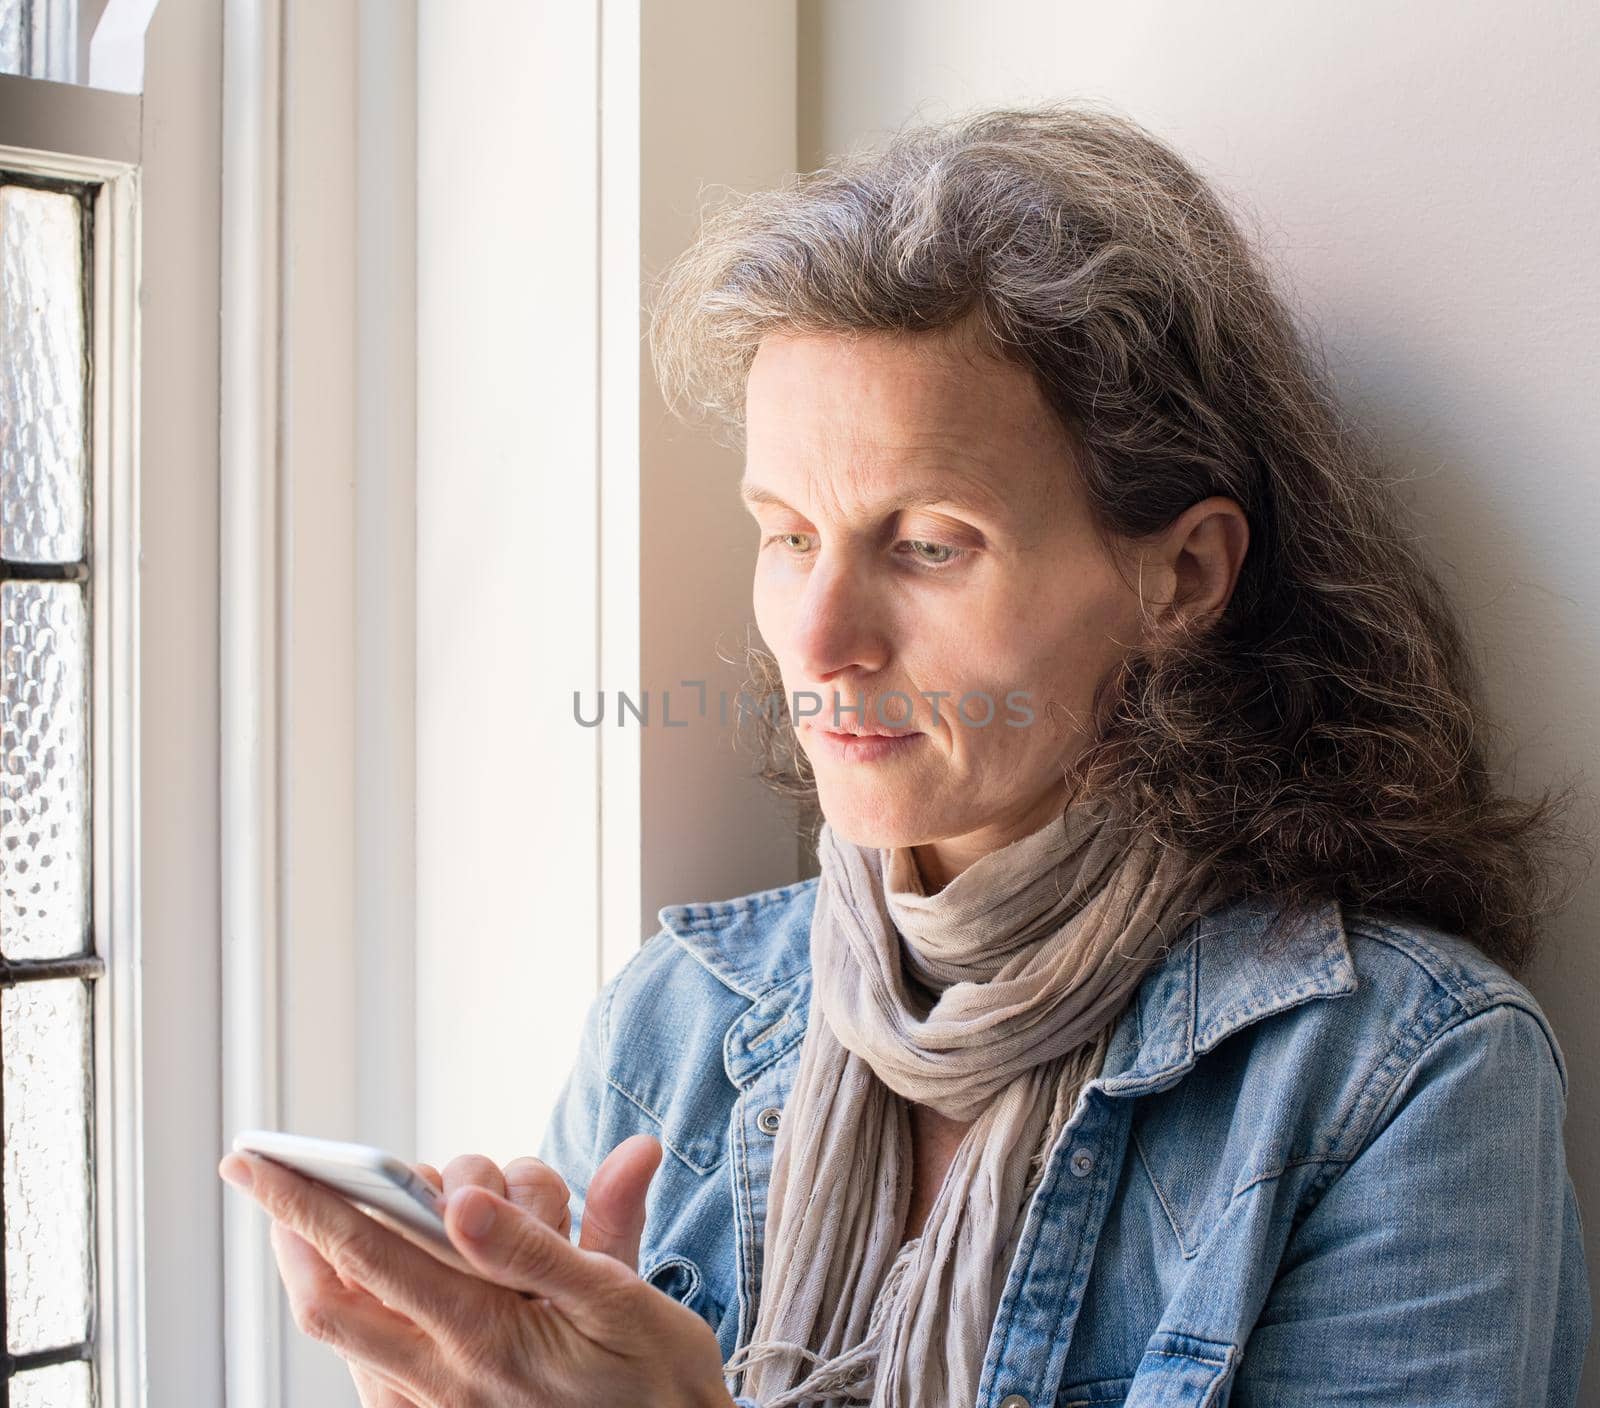 Middle aged woman with grey hair and denim shirt using smart phone next to window (selective focus) by natalie_board